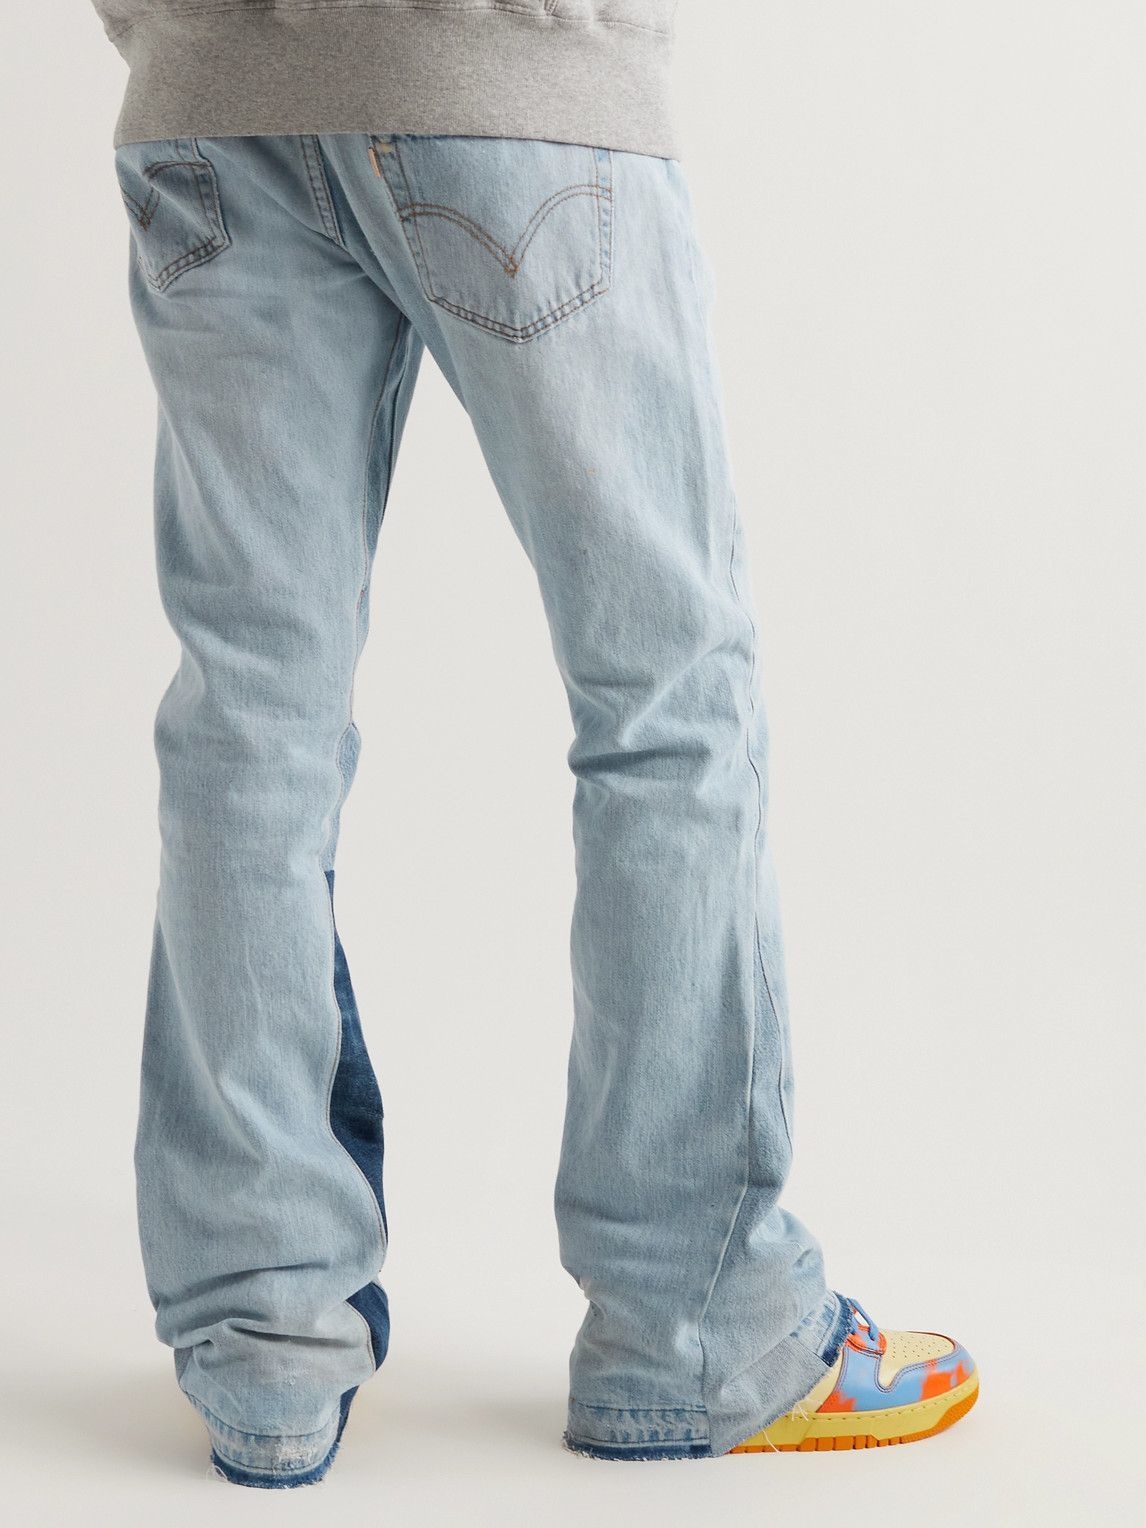 Gallery Dept. - La Flare Distressed Two-Tone Jeans - Blue Gallery